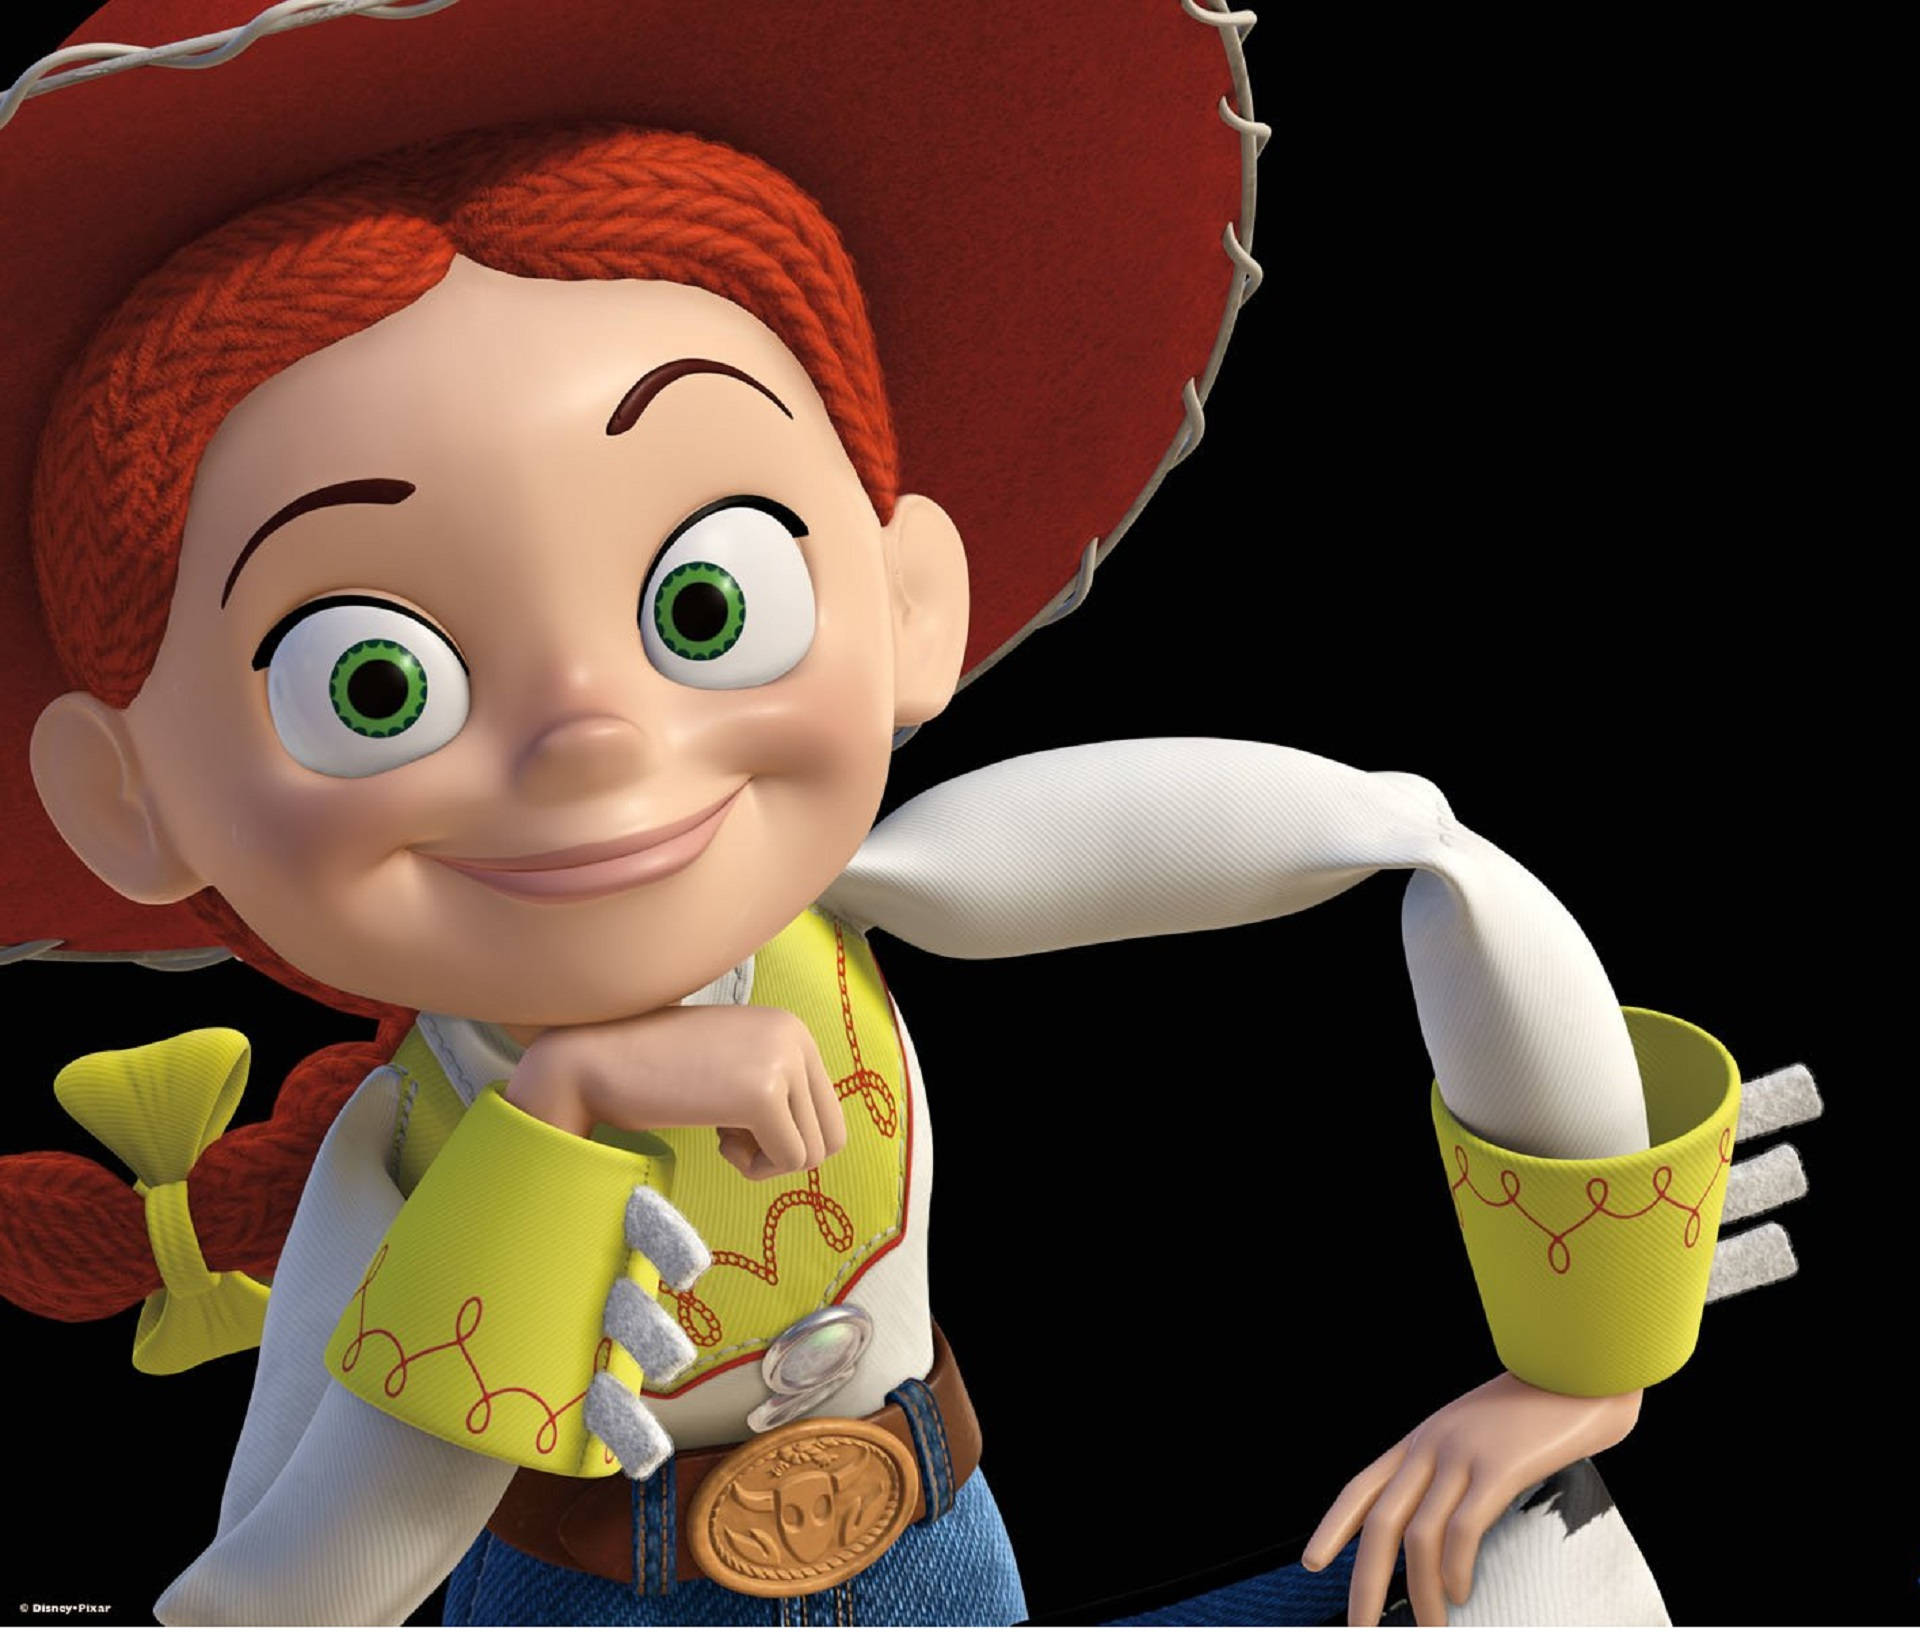 Mural af Toy Story 3 Cowgirl Jessie Wallpaper